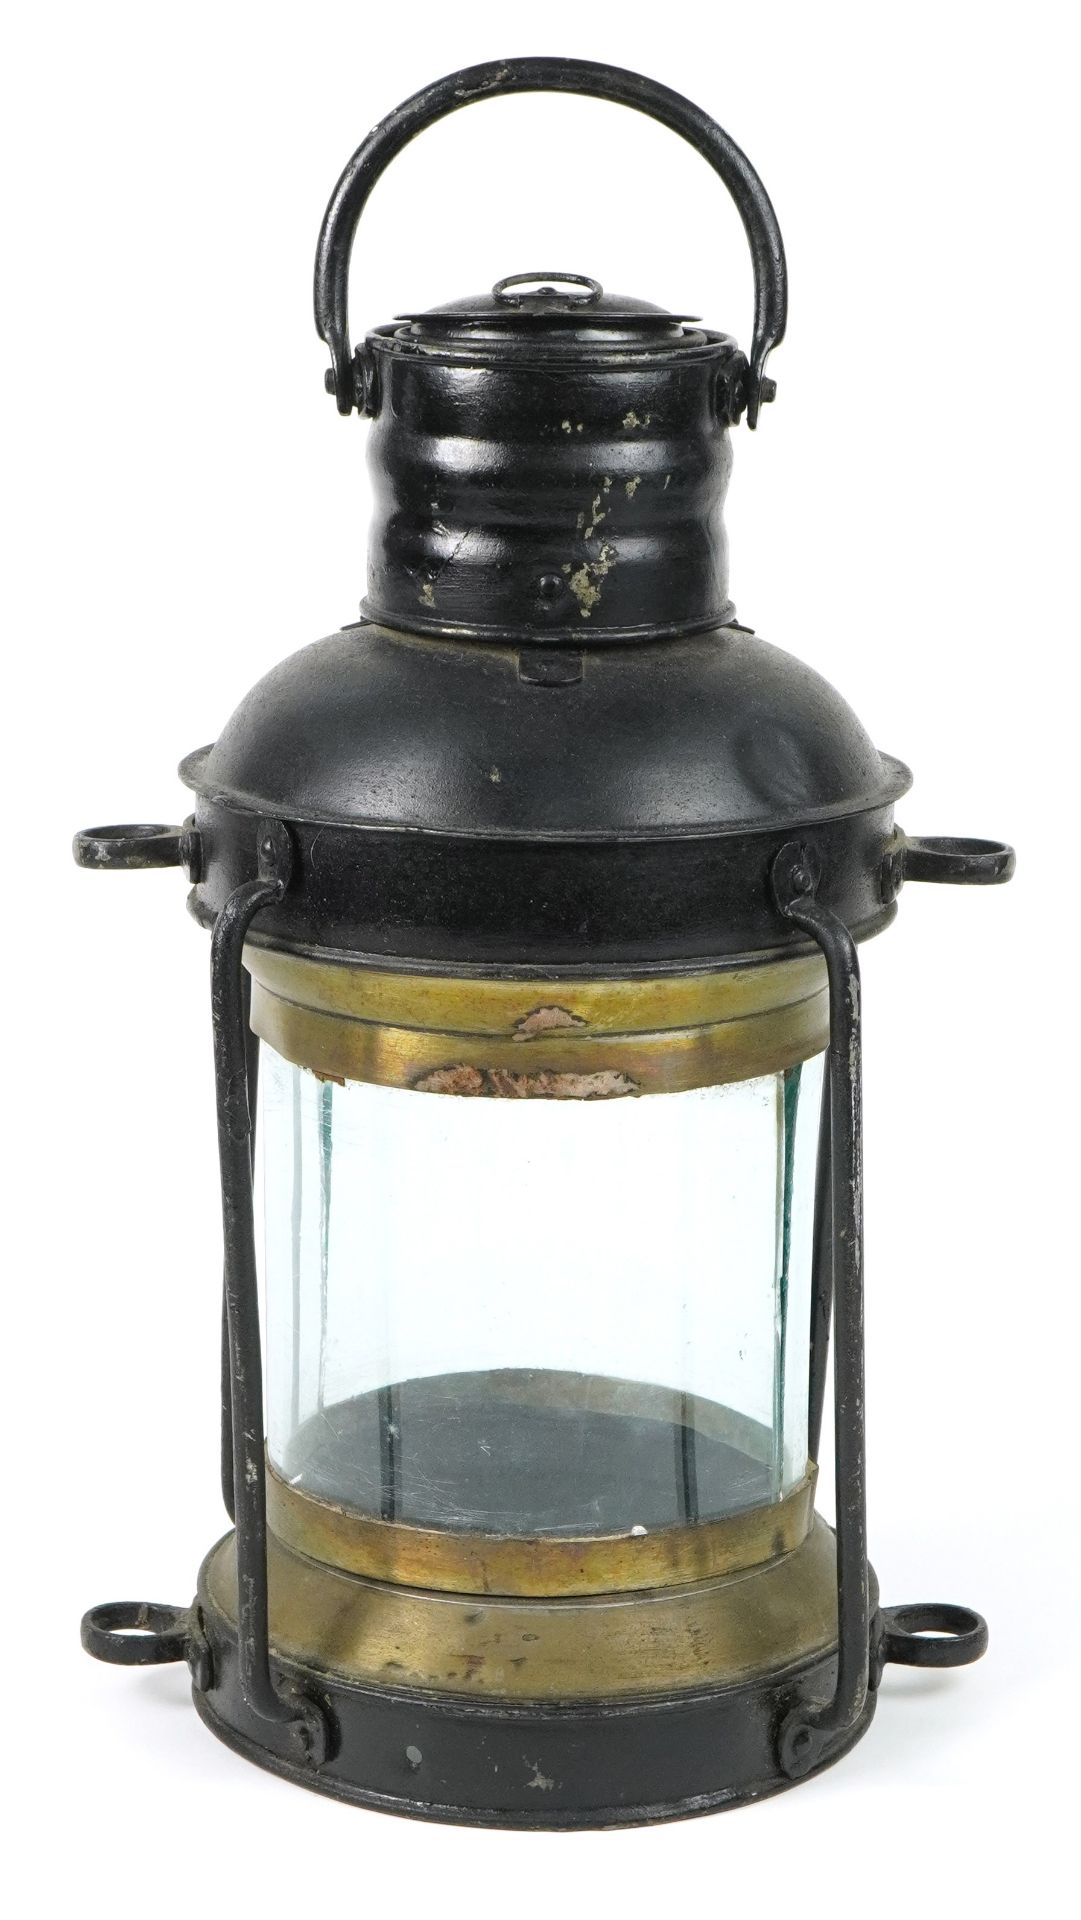 Antique shipping interest ship's hanging lantern with glass panel, 42cm high excluding the handle - Image 2 of 3